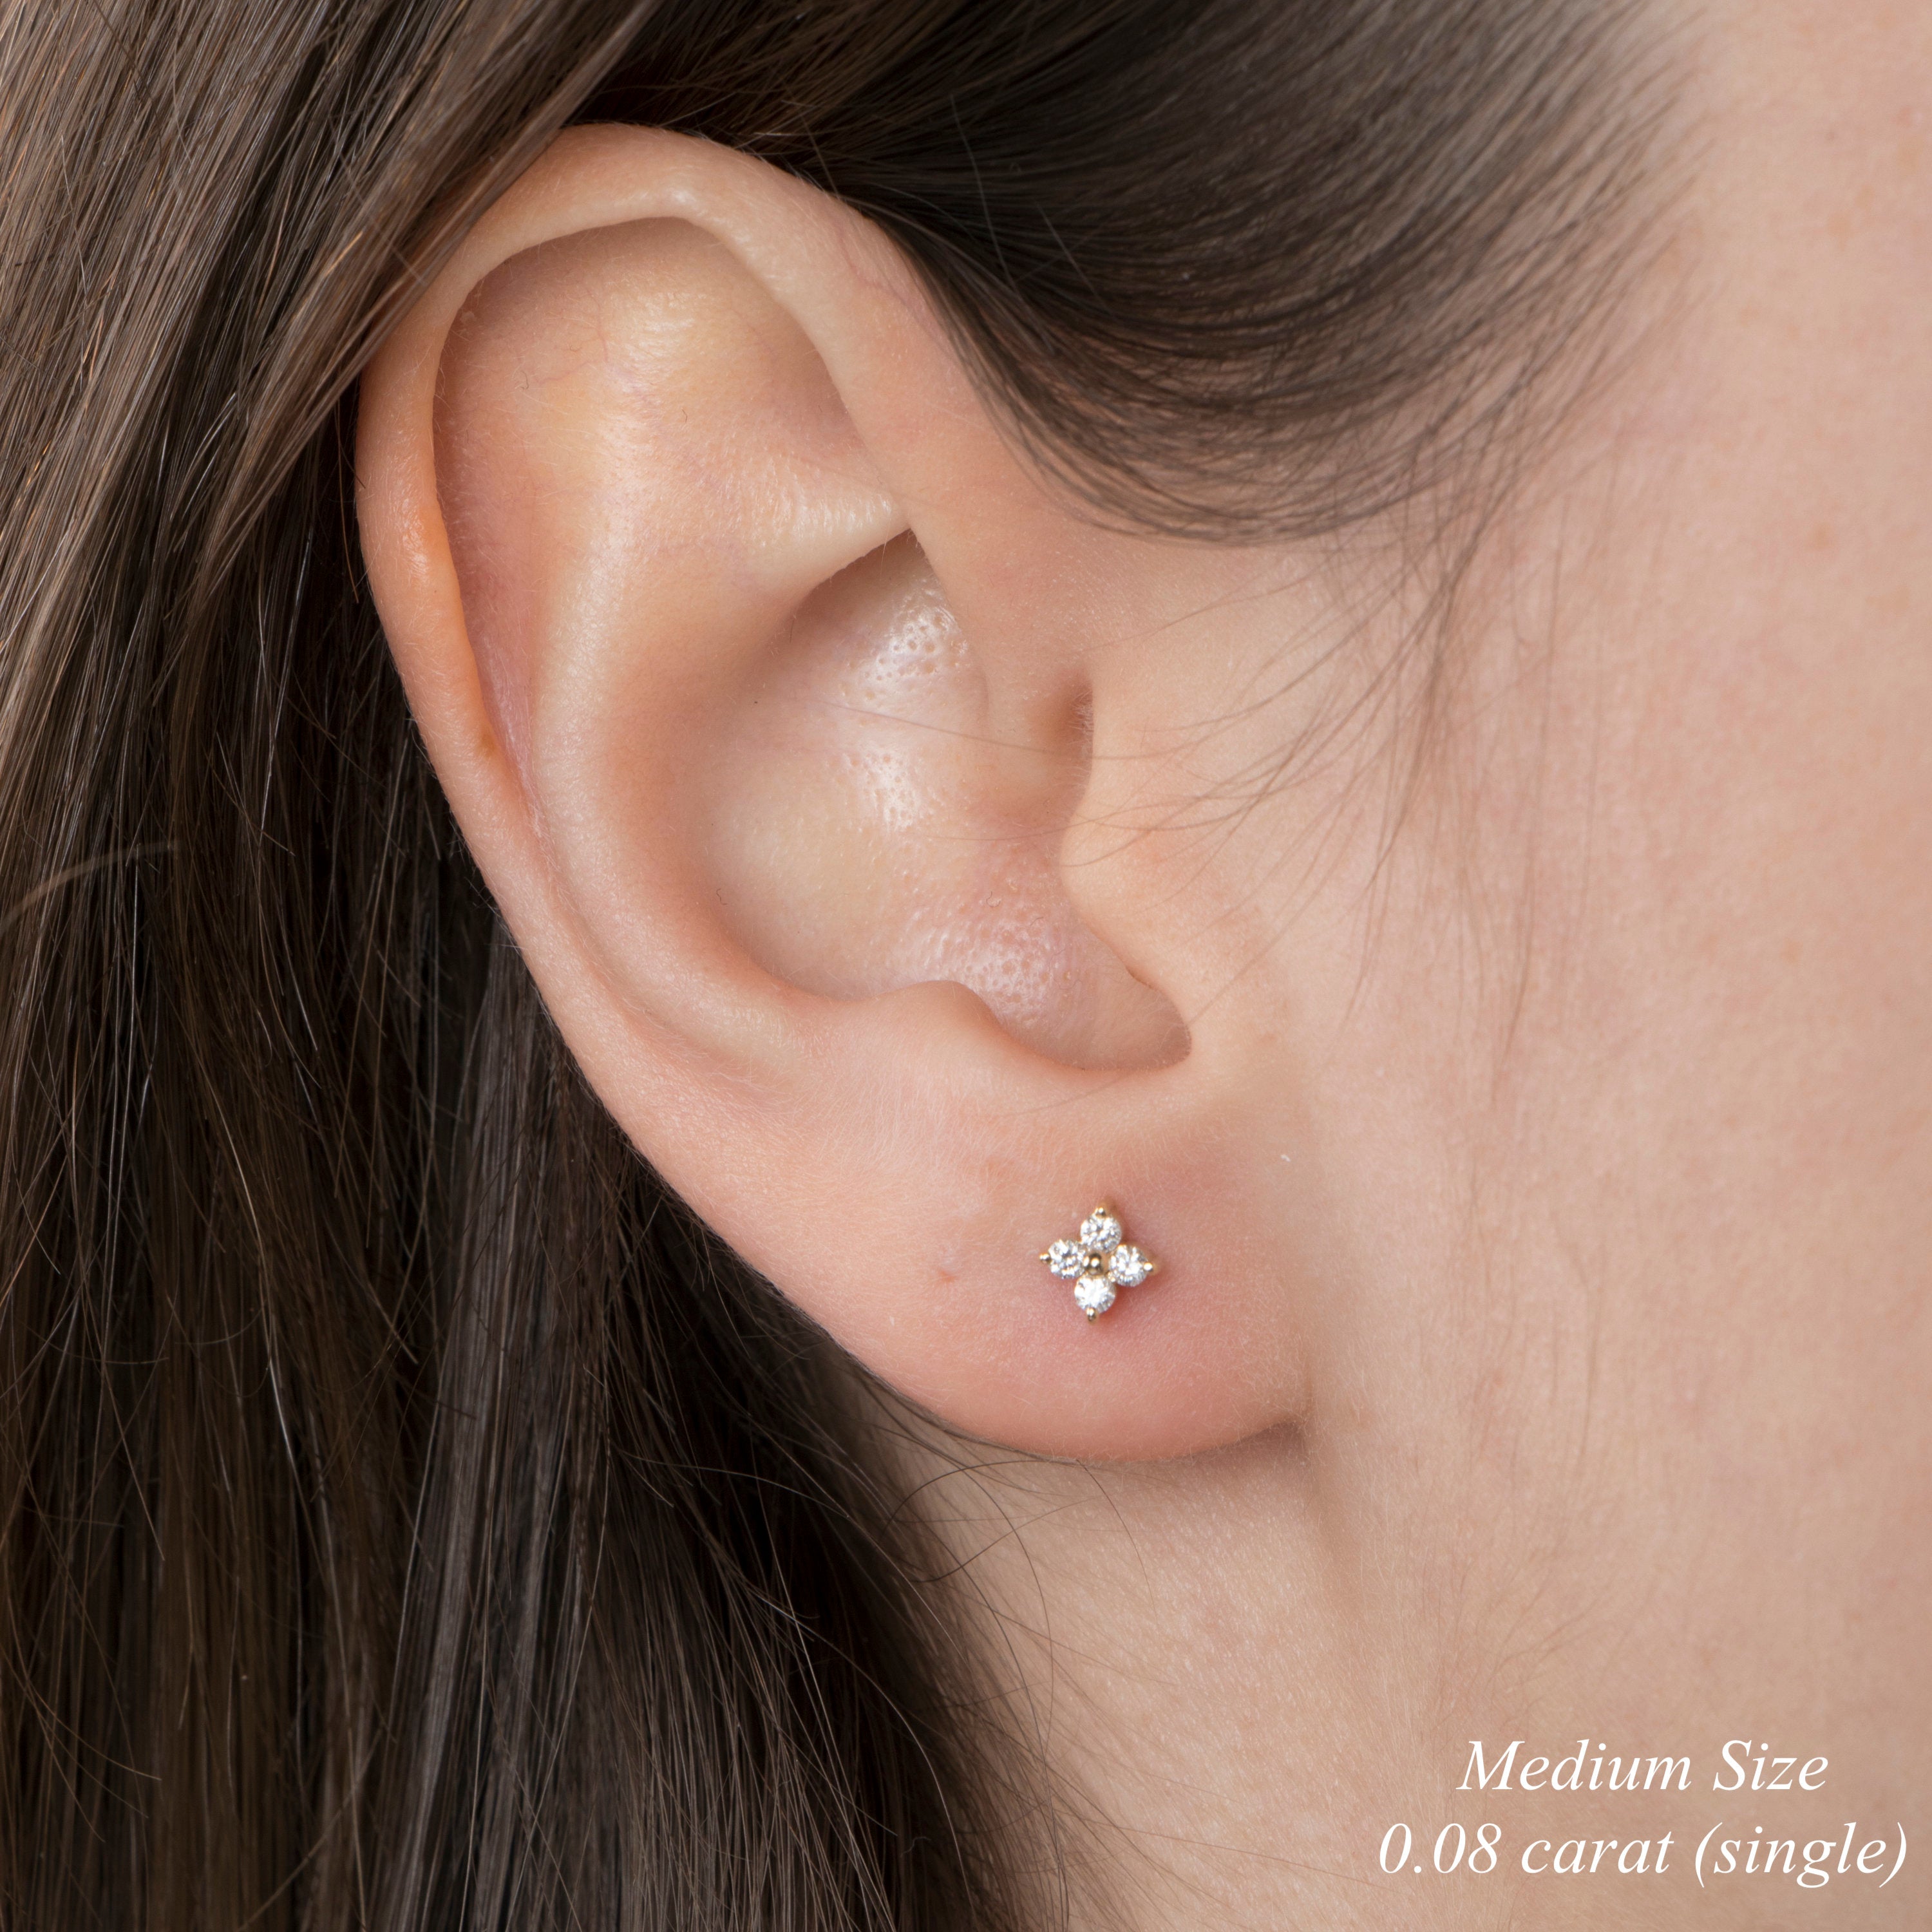 Diamond Stud Earrings Available in 14K and 18K Gold